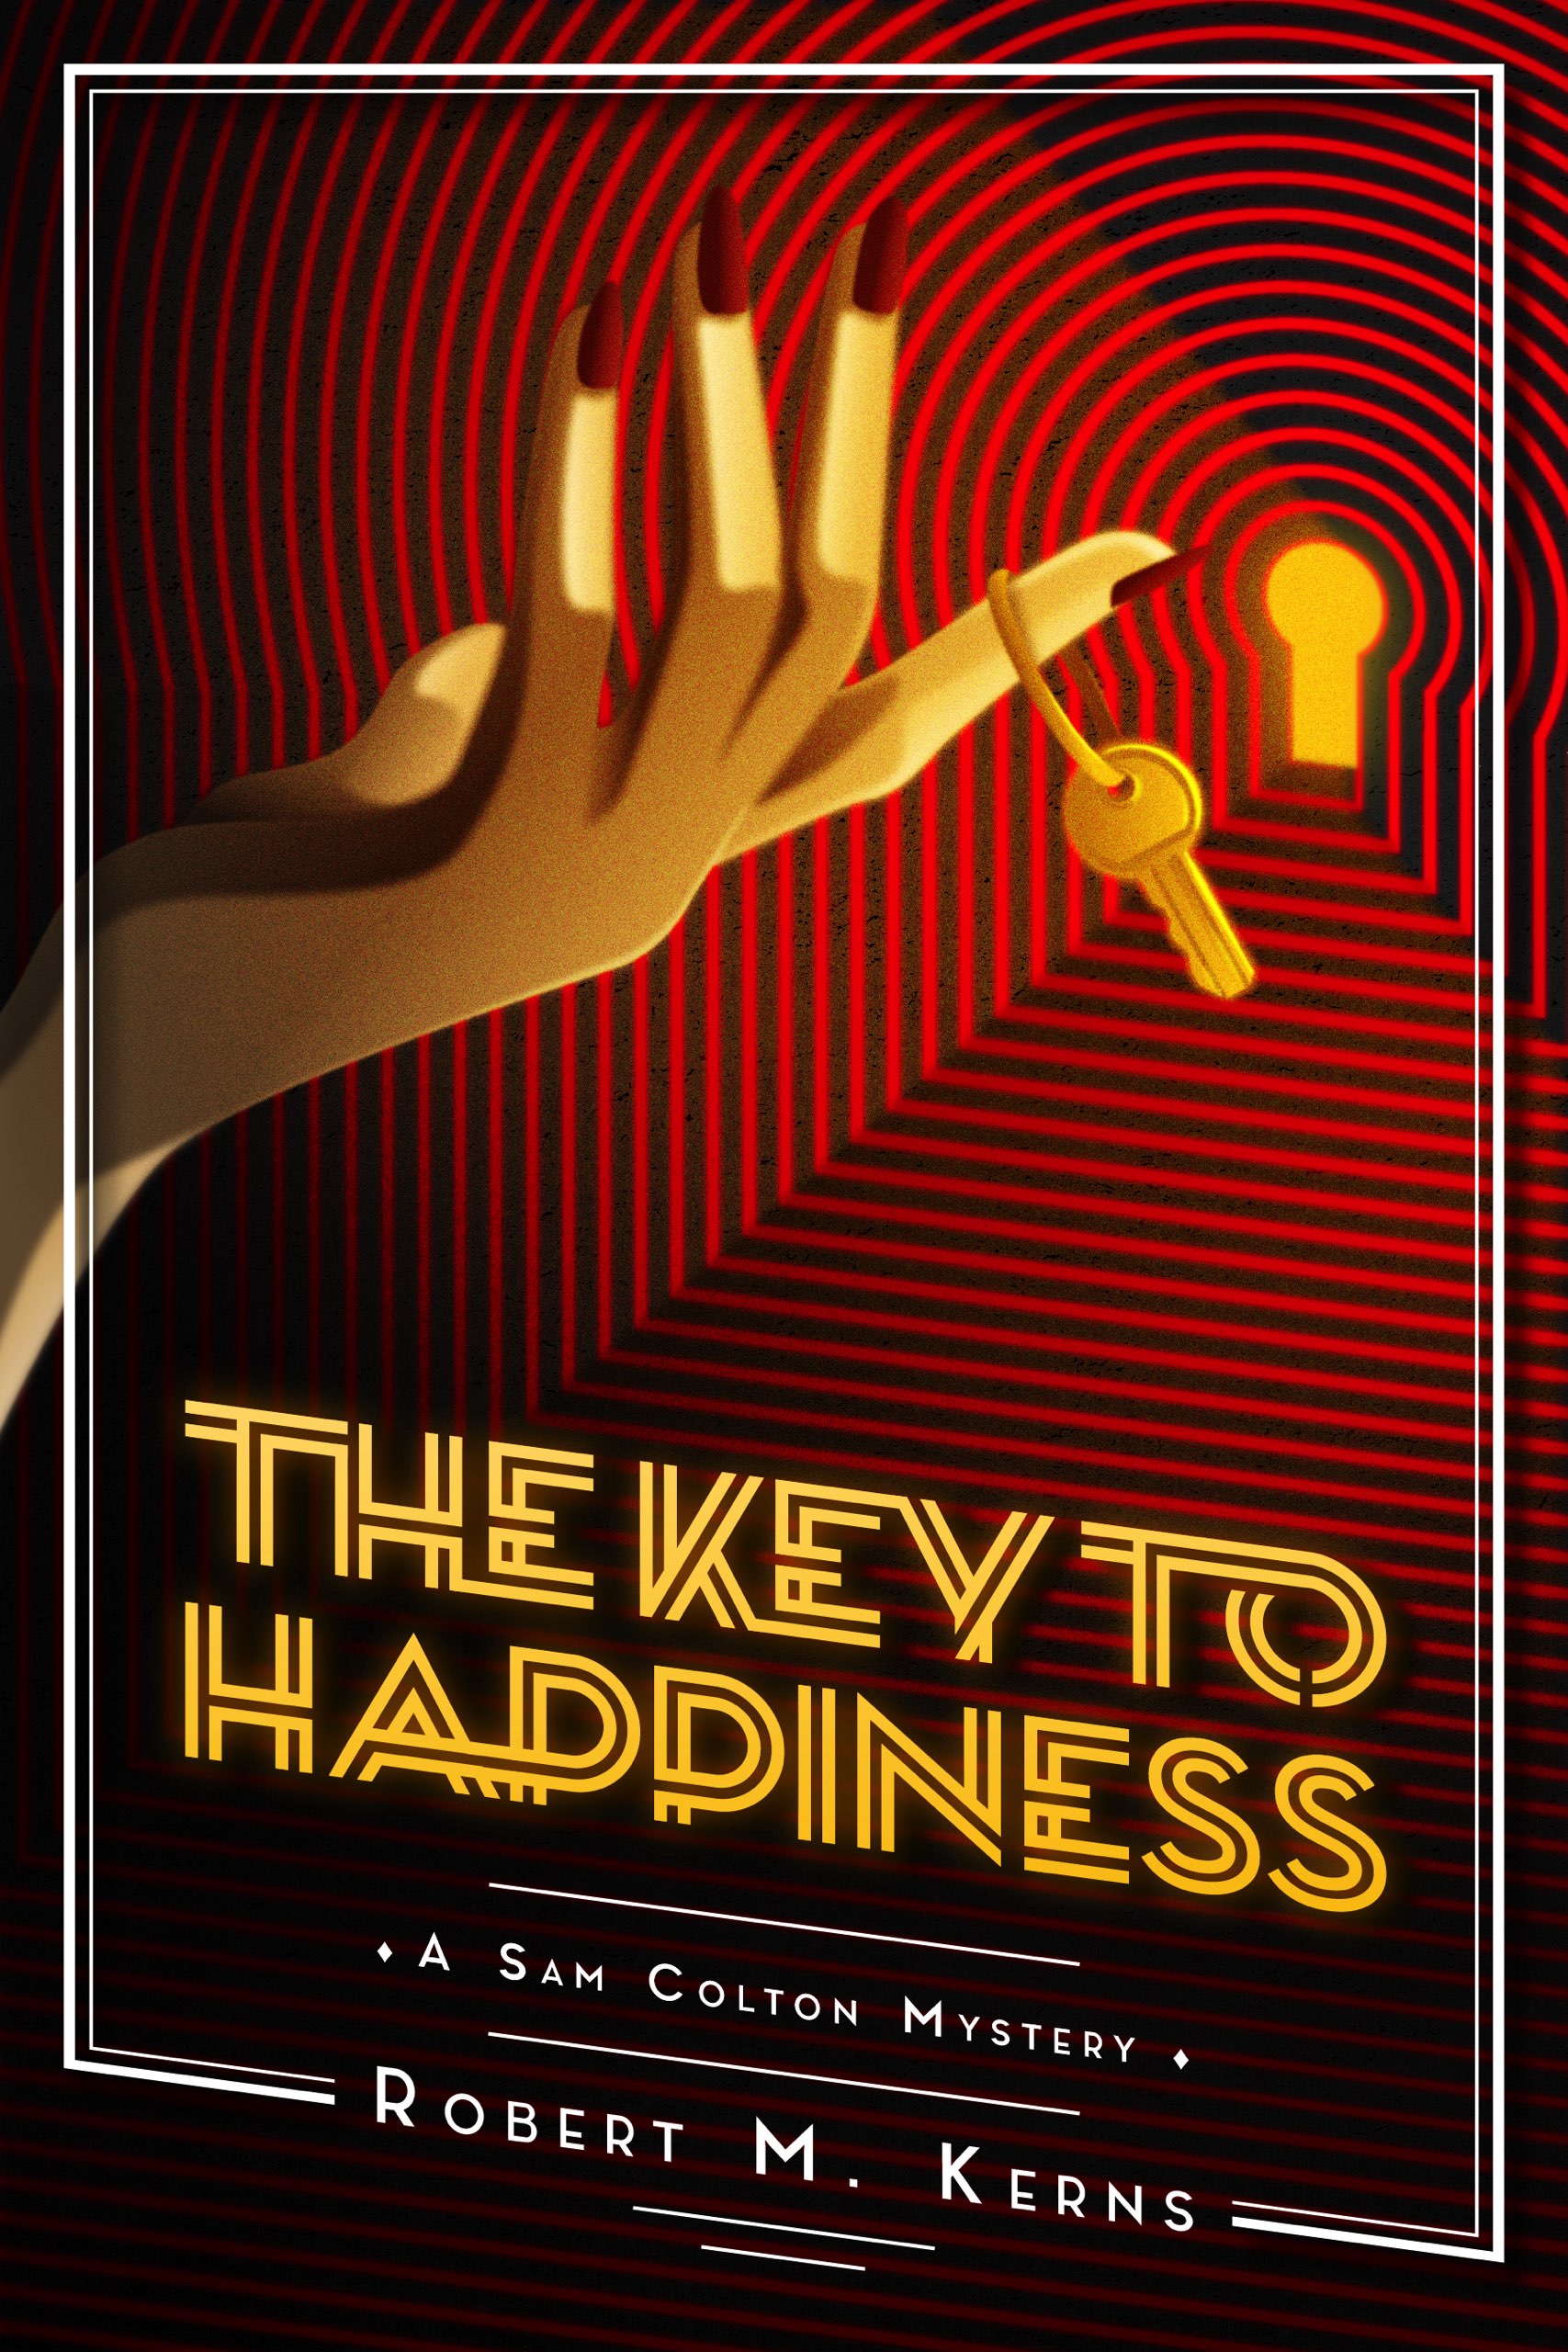 The Key to Happiness by Robert M. Kerns